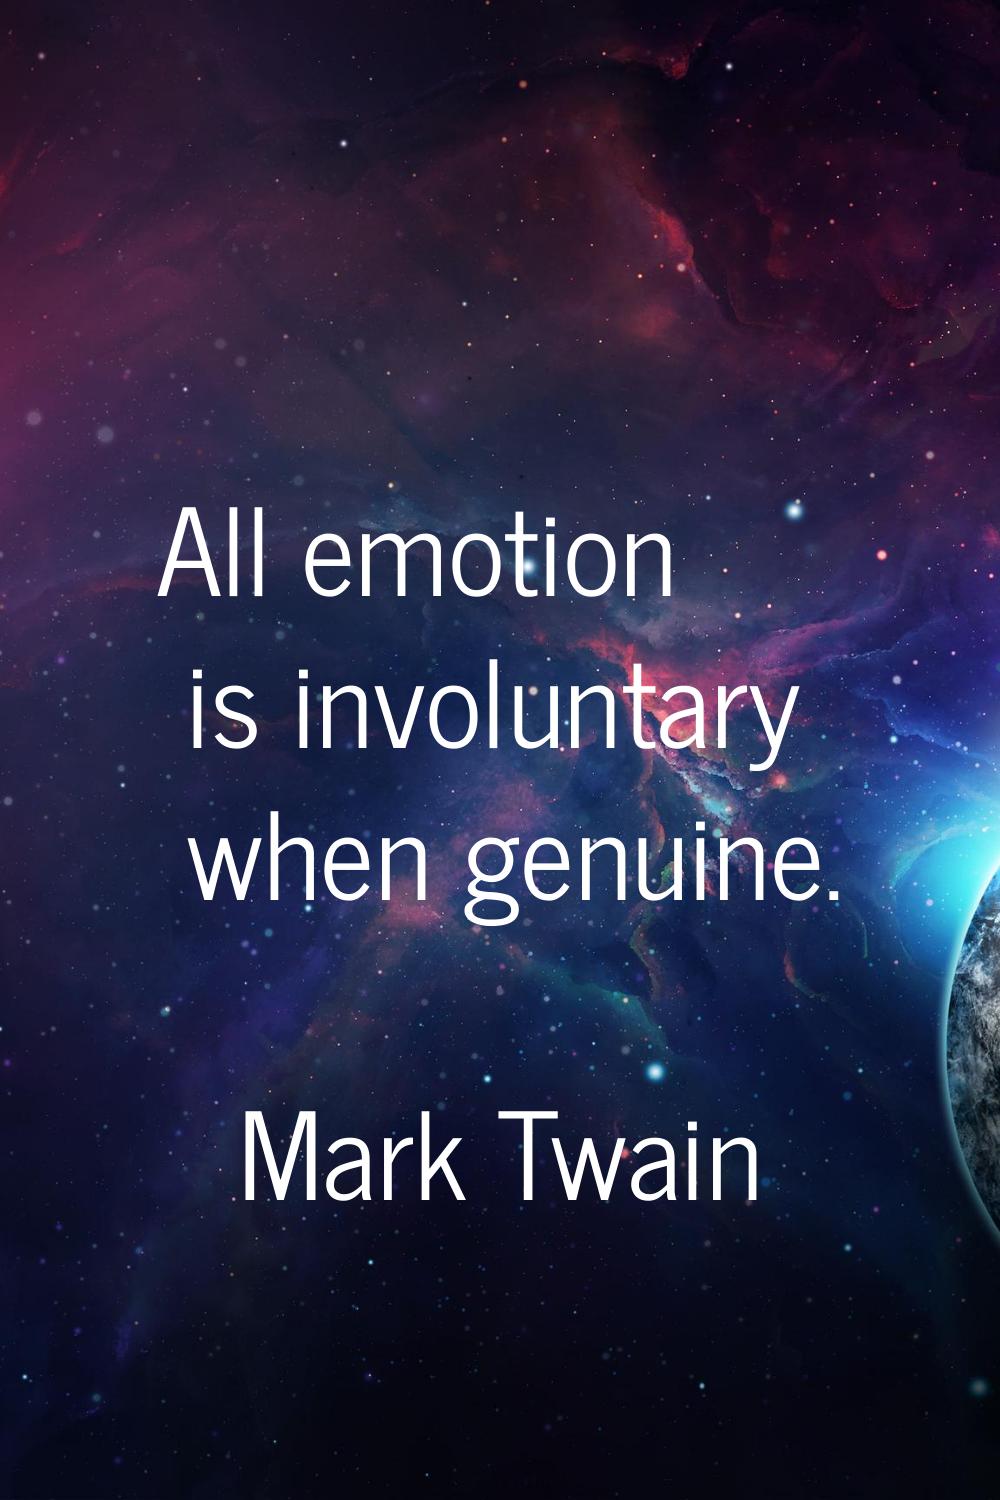 All emotion is involuntary when genuine.